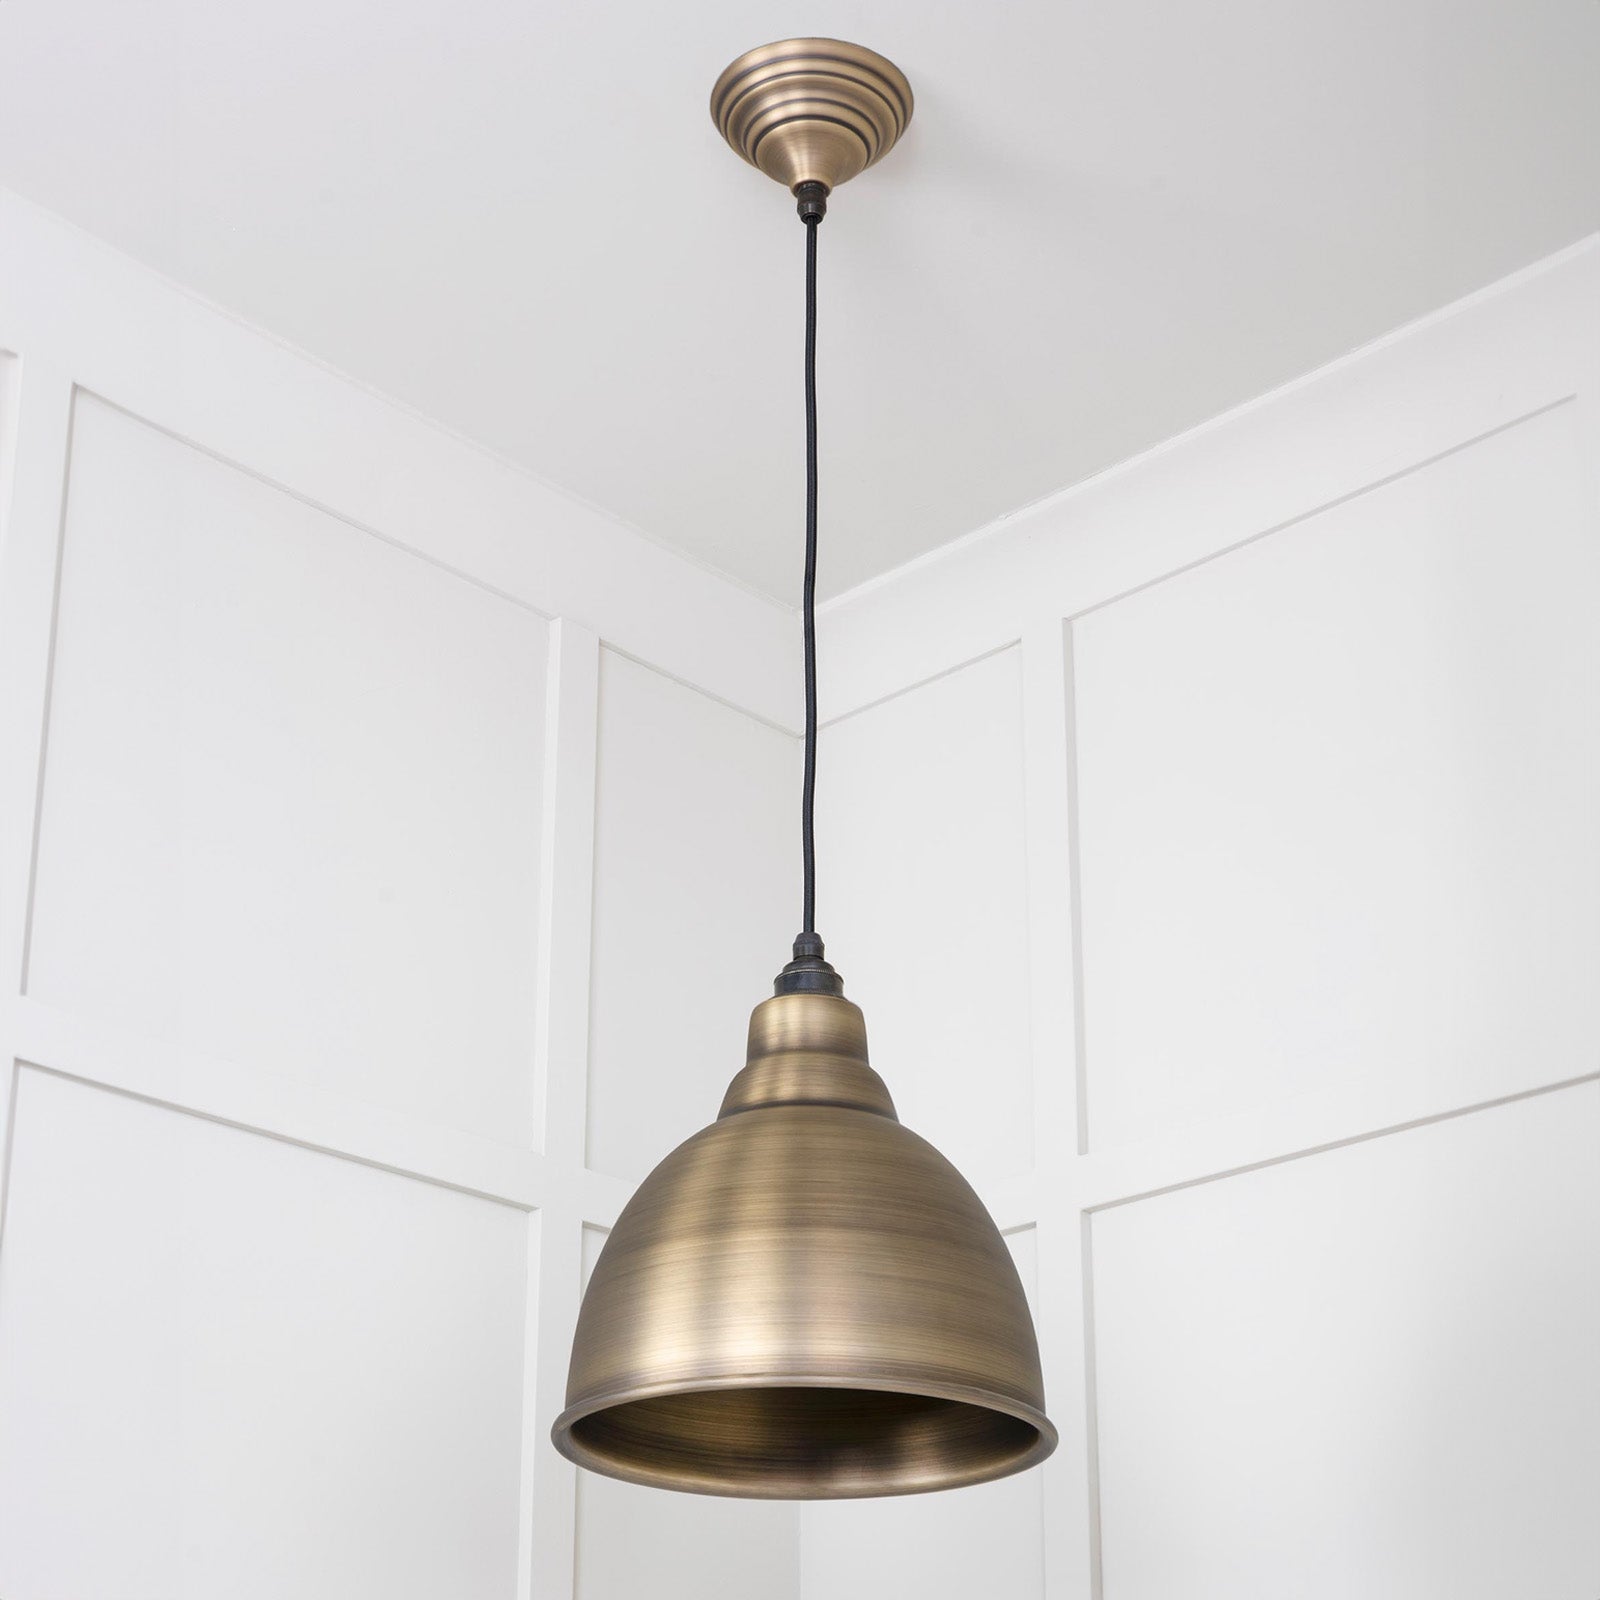 SHOW Full Image of Hanging Brindley Ceiling Light in Aged Brass